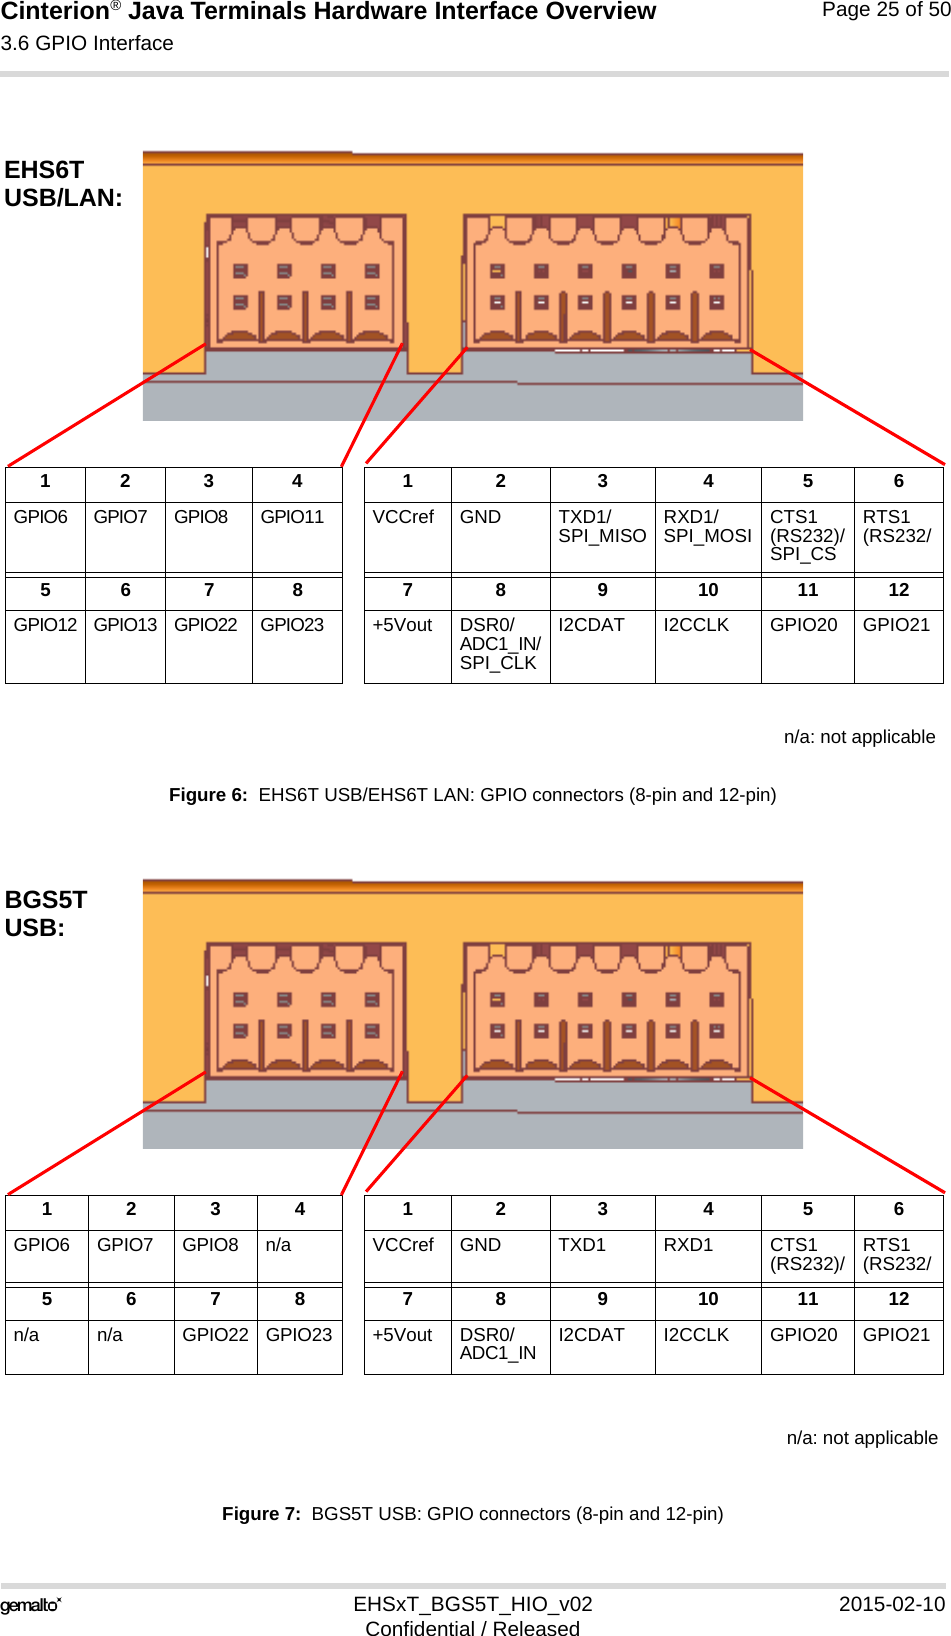 Cinterion® Java Terminals Hardware Interface Overview3.6 GPIO Interface39EHSxT_BGS5T_HIO_v02 2015-02-10Confidential / ReleasedPage 25 of 50Figure 6:  EHS6T USB/EHS6T LAN: GPIO connectors (8-pin and 12-pin)Figure 7:  BGS5T USB: GPIO connectors (8-pin and 12-pin)12 3 4 1 2 3 4 5 6GPIO6 GPIO7 GPIO8 GPIO11 VCCref GND TXD1/SPI_MISO RXD1/SPI_MOSI CTS1(RS232)/SPI_CSRTS1(RS232/56 7 8 7 8 9 10 1112GPIO12 GPIO13 GPIO22 GPIO23 +5Vout DSR0/ADC1_IN/SPI_CLKI2CDAT I2CCLK GPIO20 GPIO21EHS6TUSB/LAN:n/a: not applicable1234 1 2 3 4 5 6GPIO6 GPIO7 GPIO8 n/a VCCref GND TXD1 RXD1 CTS1(RS232)/ RTS1(RS232/5678 7 8 9 10 1112n/a n/a GPIO22 GPIO23 +5Vout DSR0/ADC1_IN I2CDAT I2CCLK GPIO20 GPIO21BGS5T n/a: not applicableUSB: